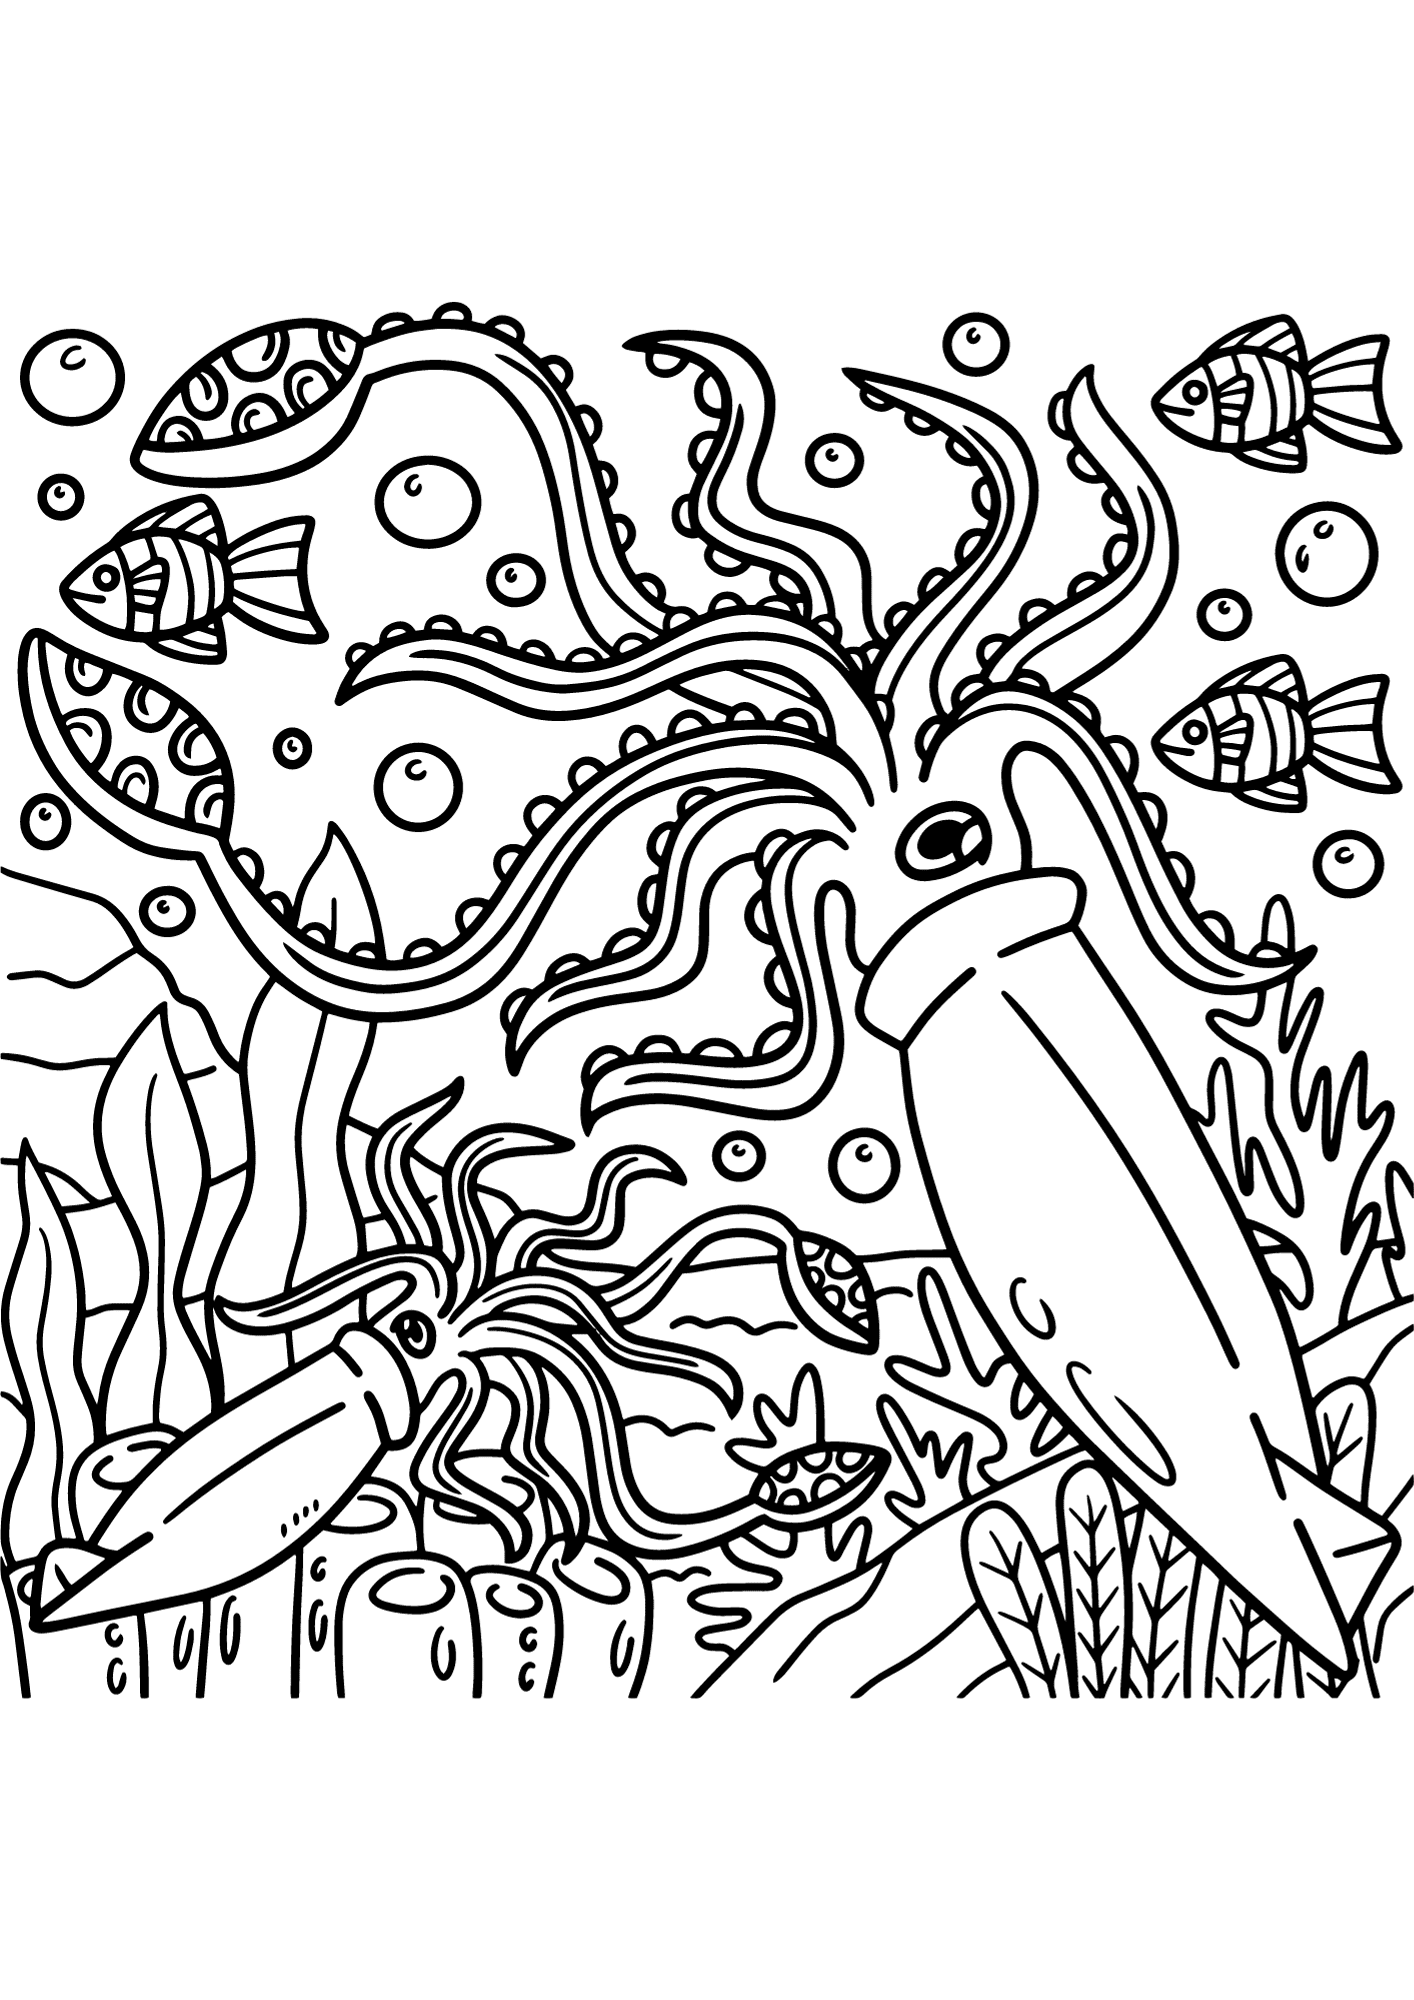 Squid Painting Coloring Pages